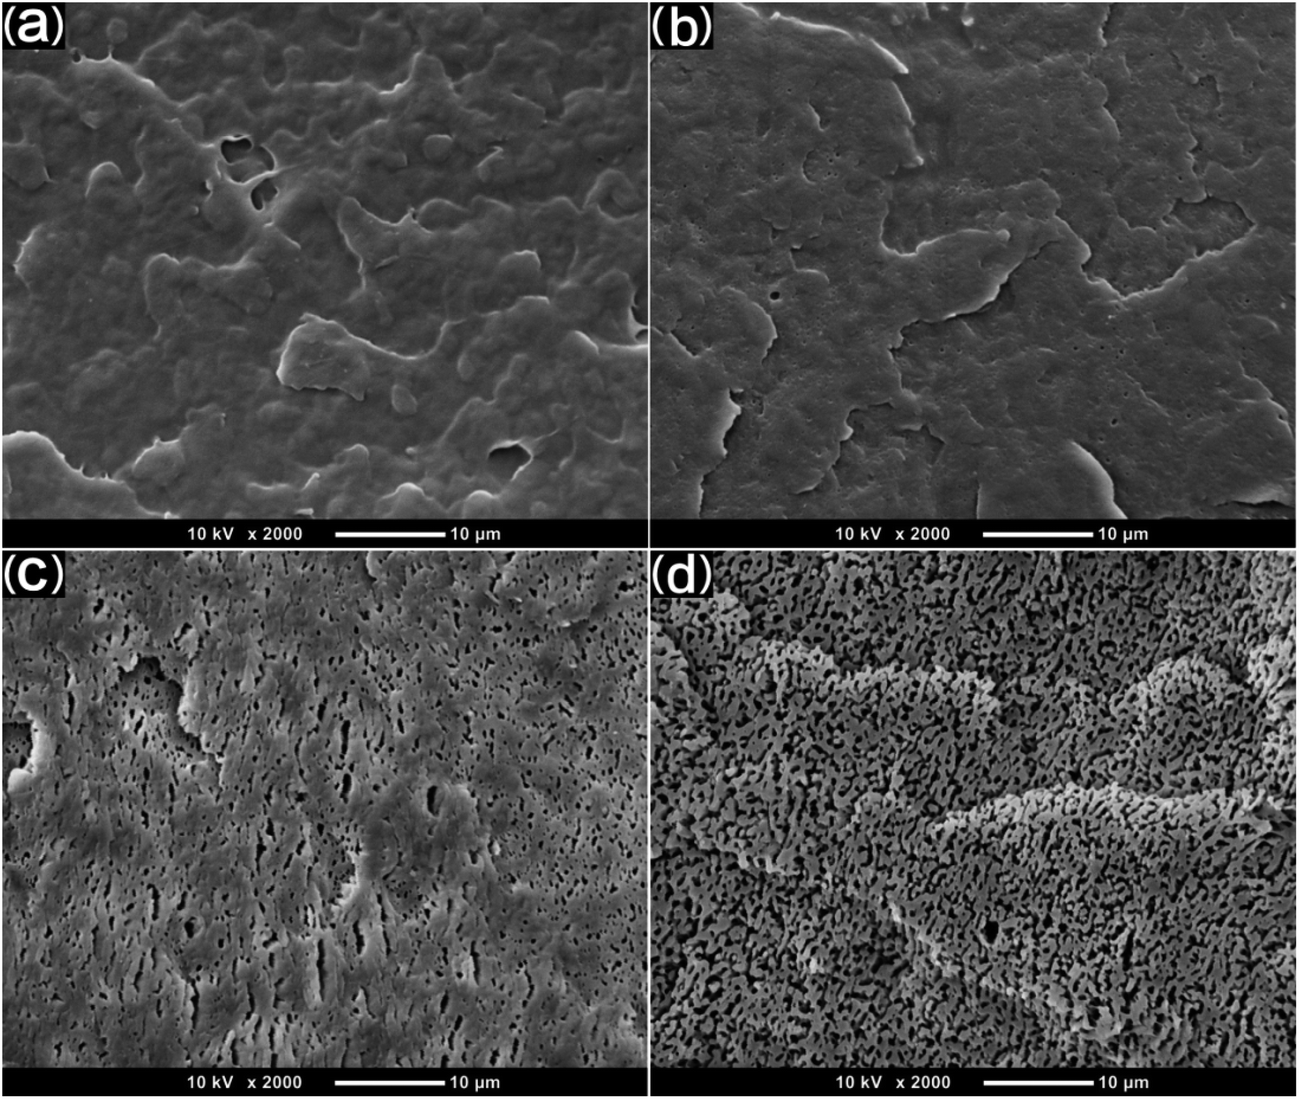 Fabrication Of Poly E Caprolactone Tissue Engineering Scaffolds With Fibrillated And Interconnected Pores Utilizing Microcellular Injection Molding A Rsc Advances Rsc Publishing Doi 10 1039 C7raa